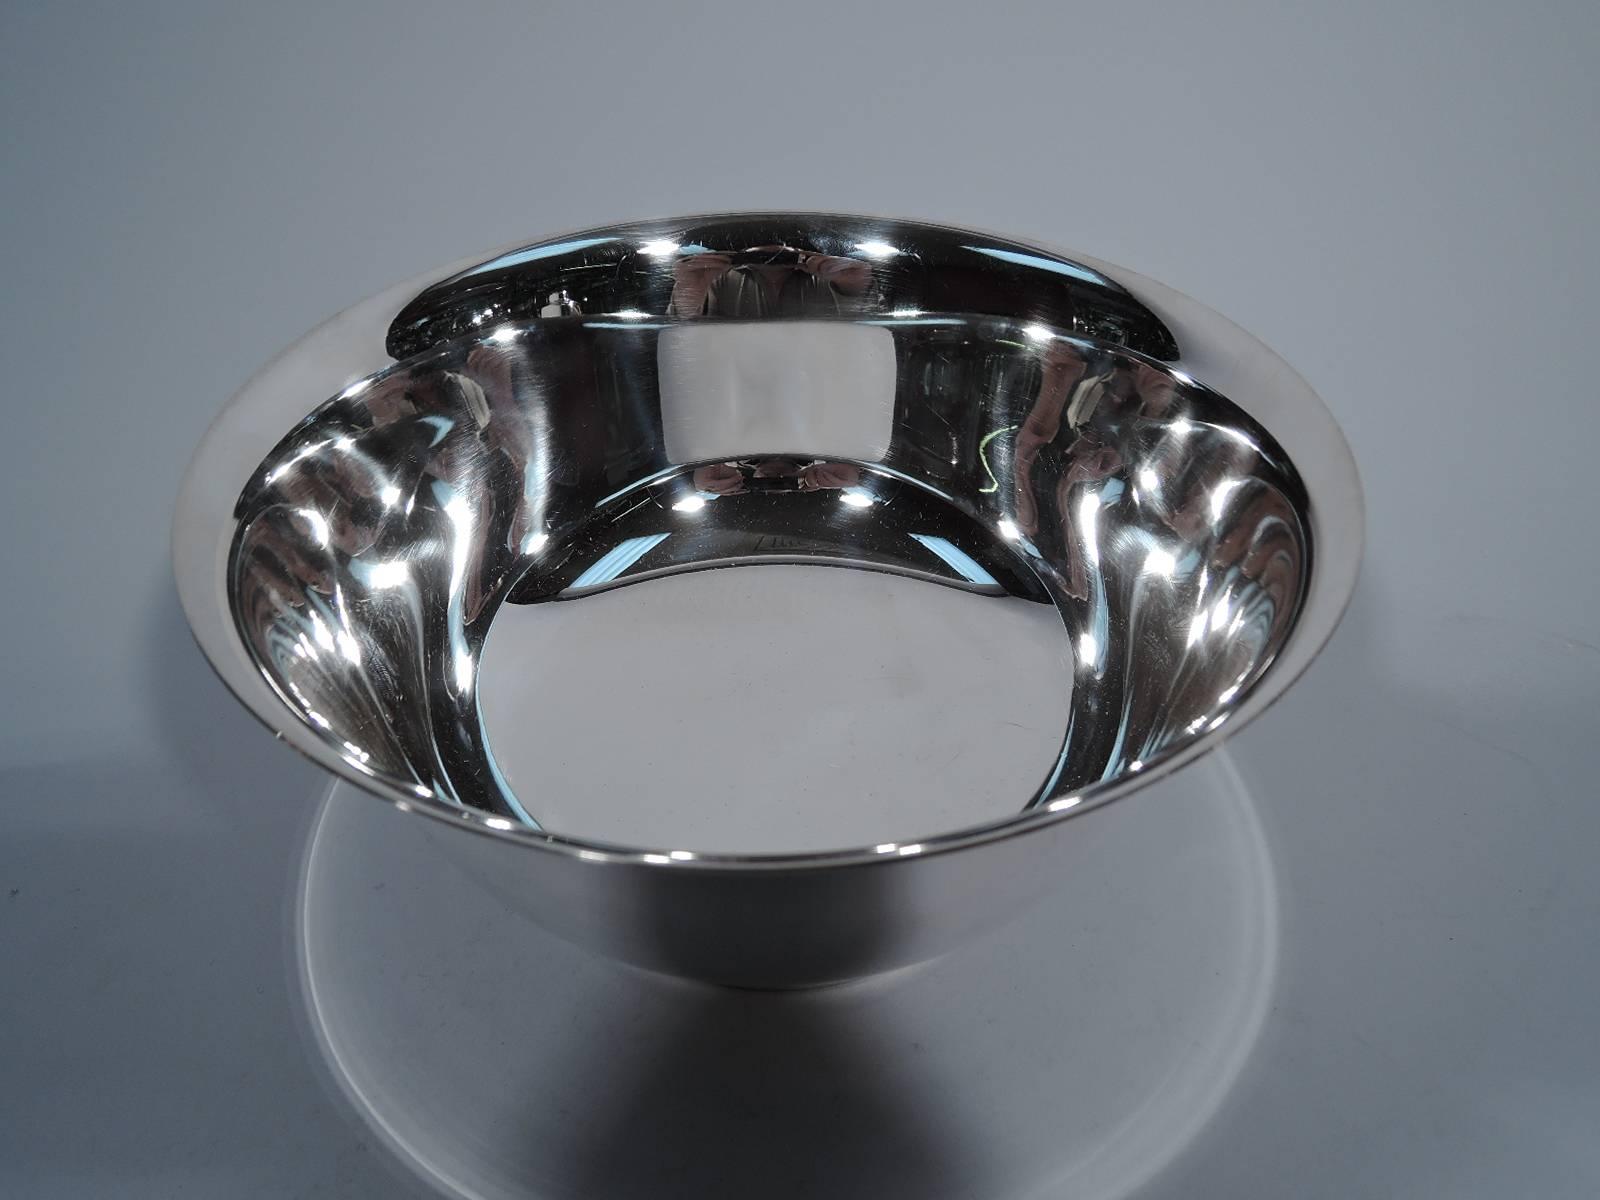 Sterling silver revere bowl. Made by Fisher in Jersey City. The historic form with curved sides, flared rim and stepped foot. Hallmark includes no. 238 and phrase Paul Revere 1768 Reproduction. Very good condition.

Dimensions: H 4 x D 8 1/8 in.